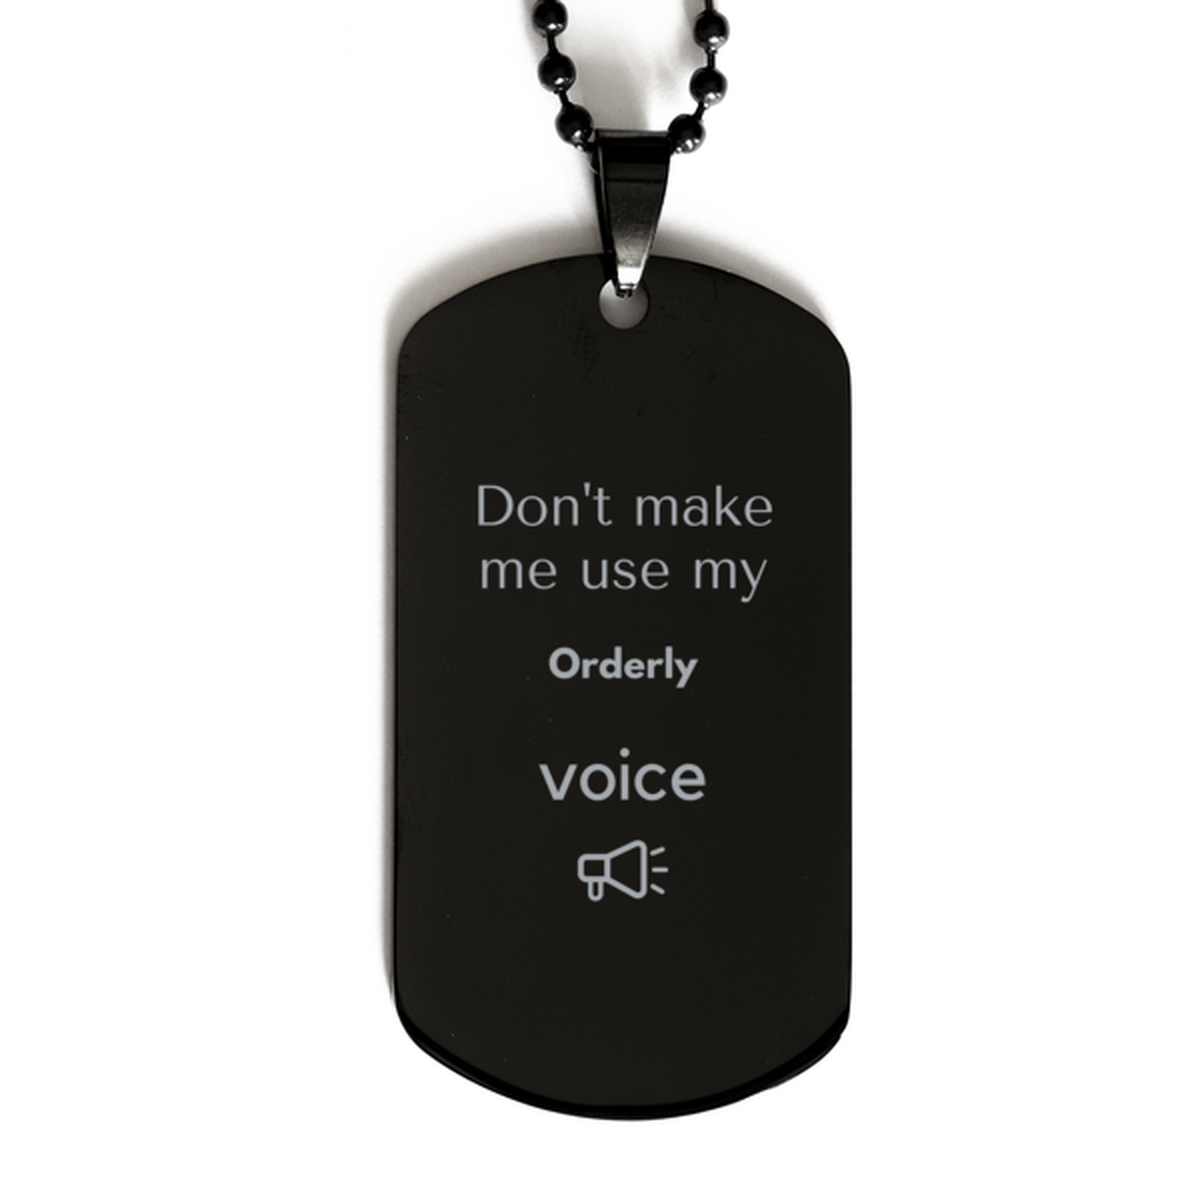 Don't make me use my Orderly voice, Sarcasm Orderly Gifts, Christmas Orderly Black Dog Tag Birthday Unique Gifts For Orderly Coworkers, Men, Women, Colleague, Friends